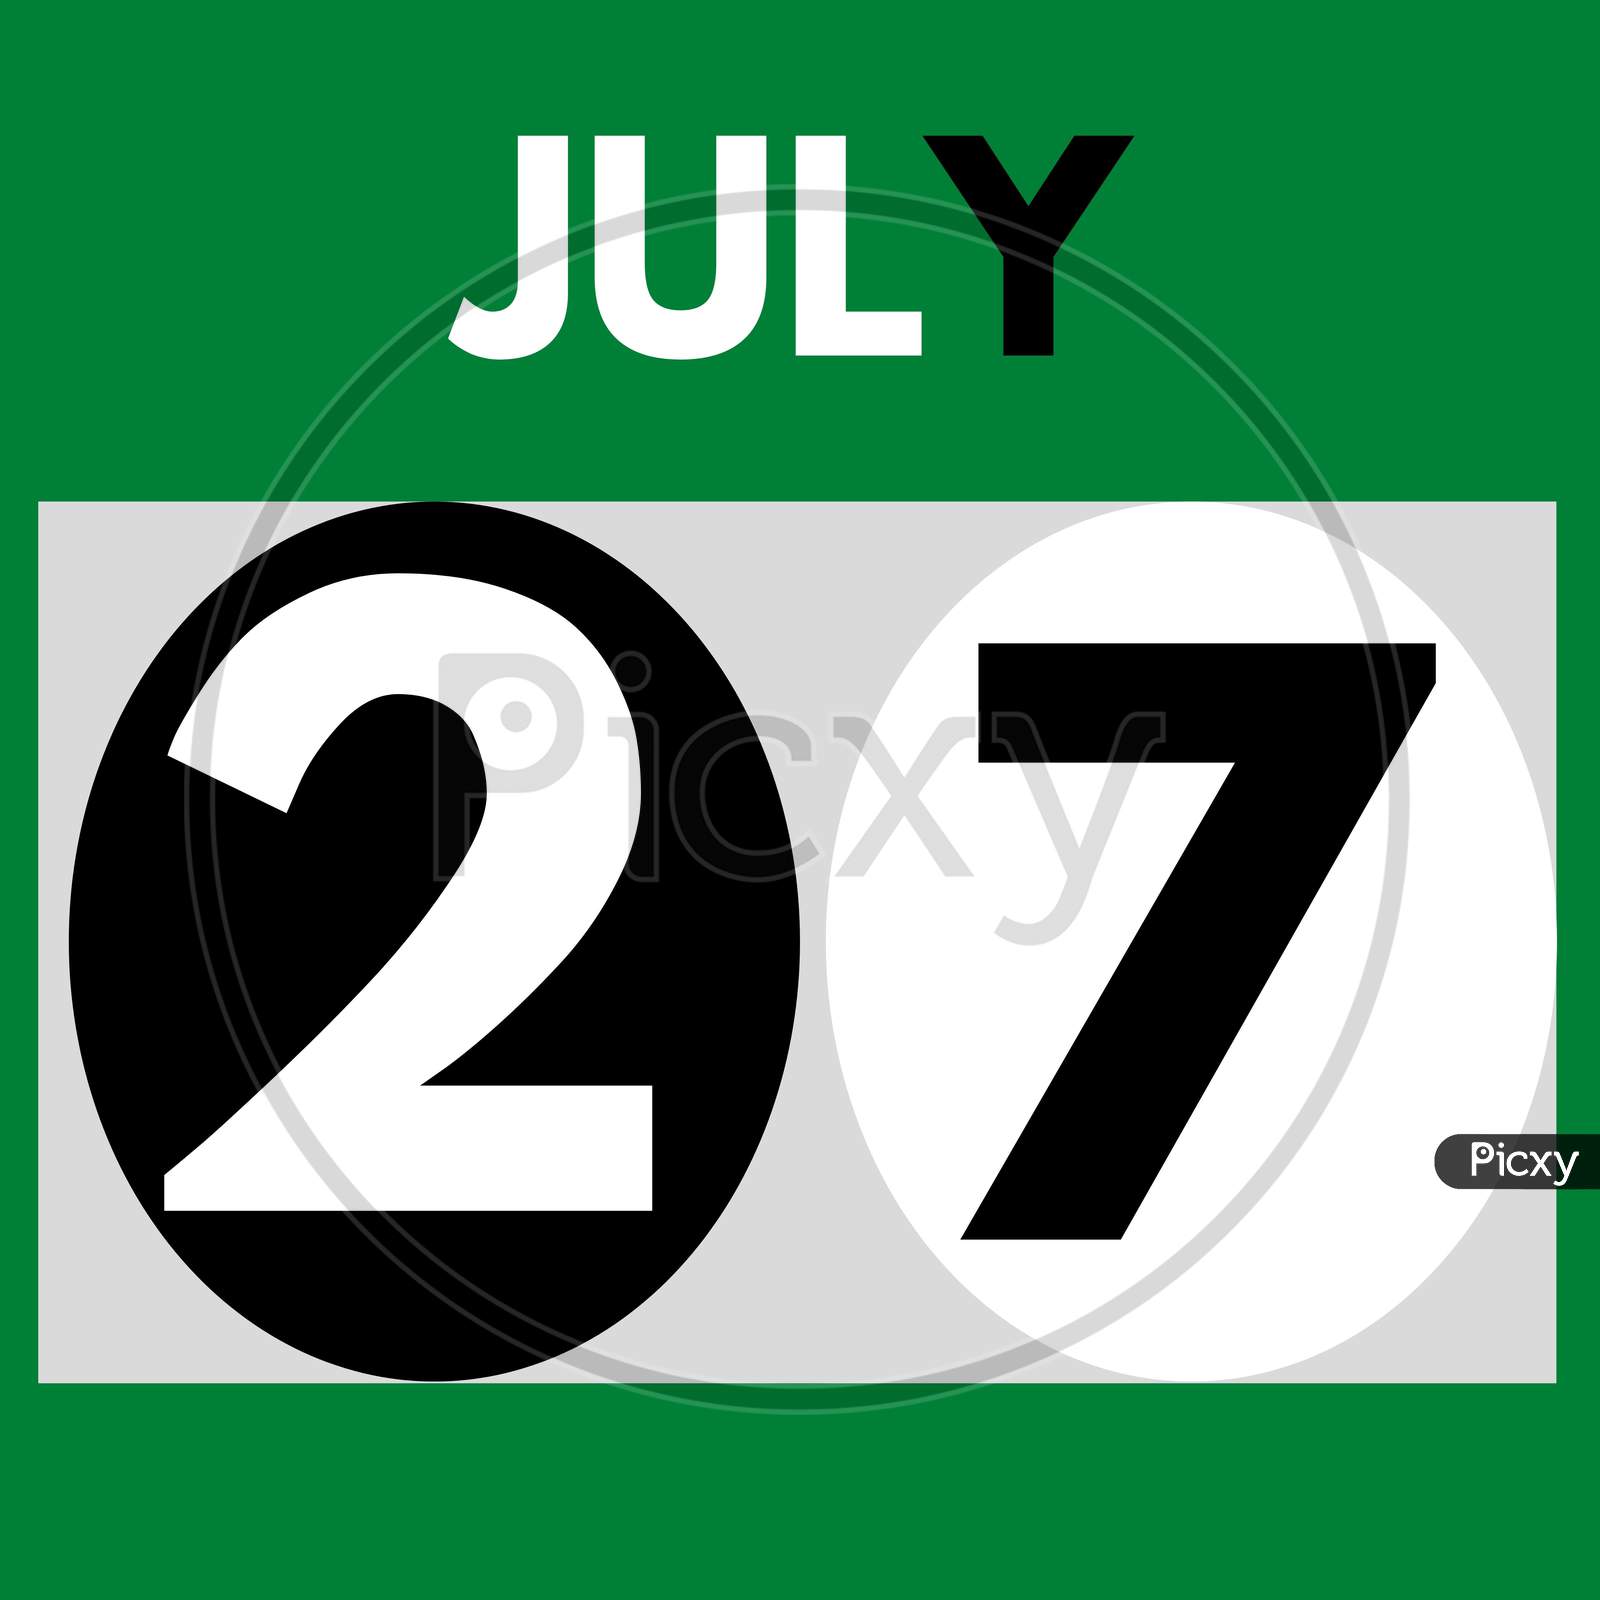 July 27 . Modern Daily Calendar Icon .Date ,Day, Month .Calendar For The Month Of July